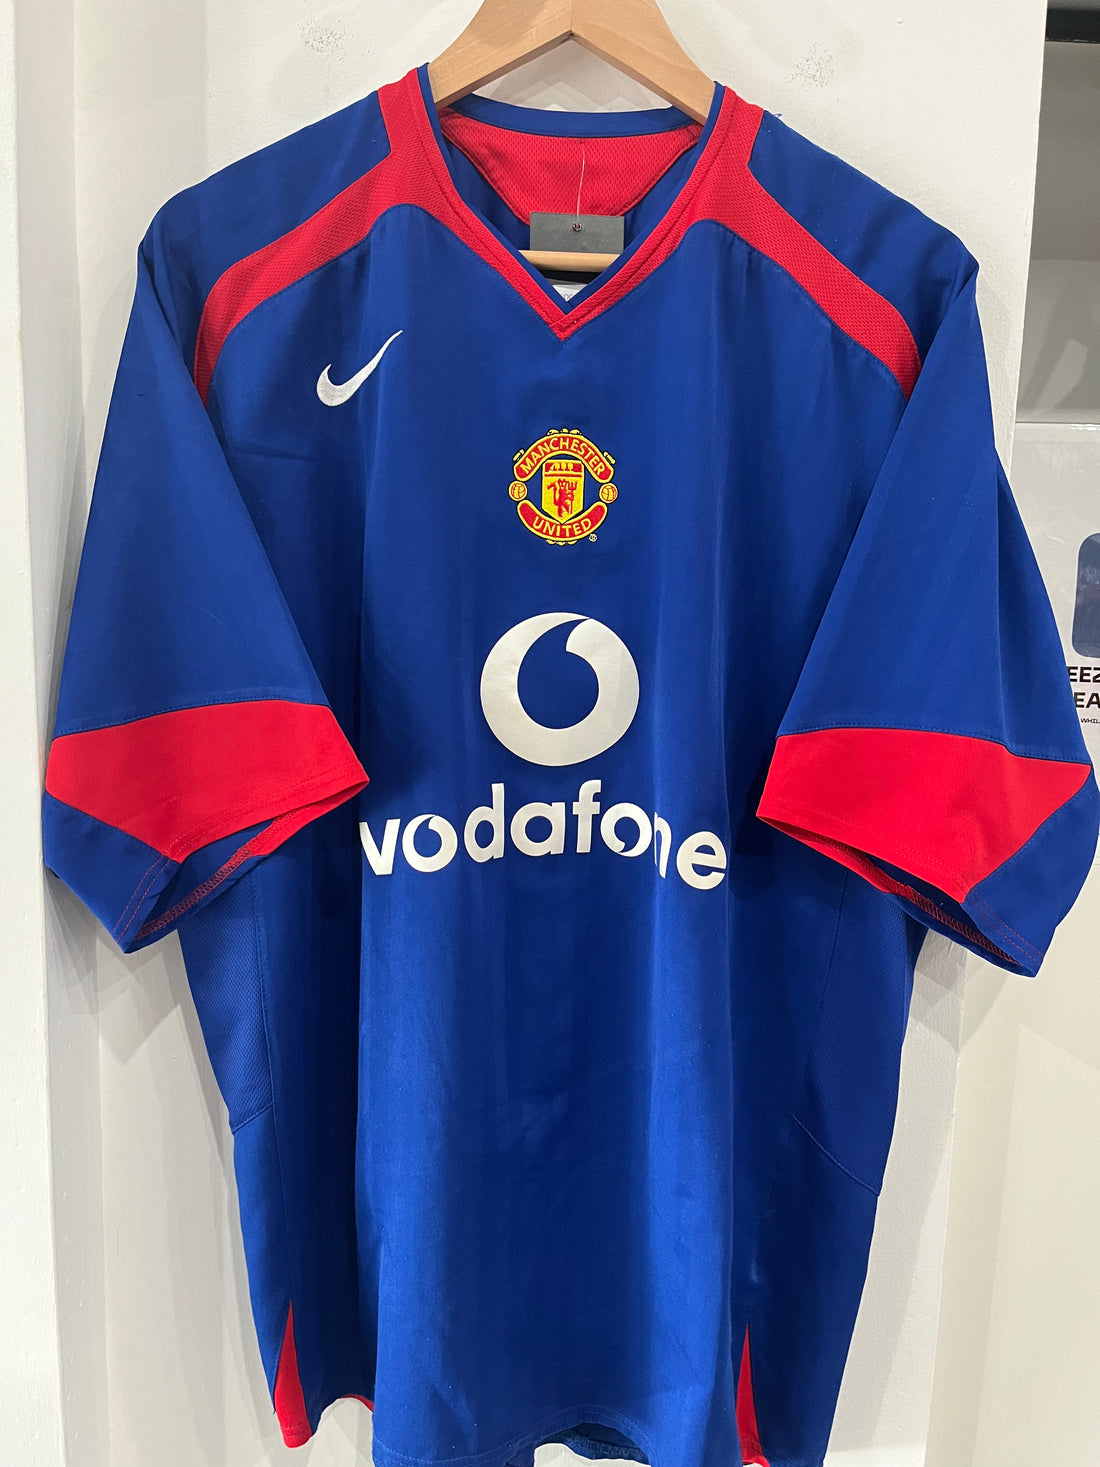 2005-06 Manchester United Jersey